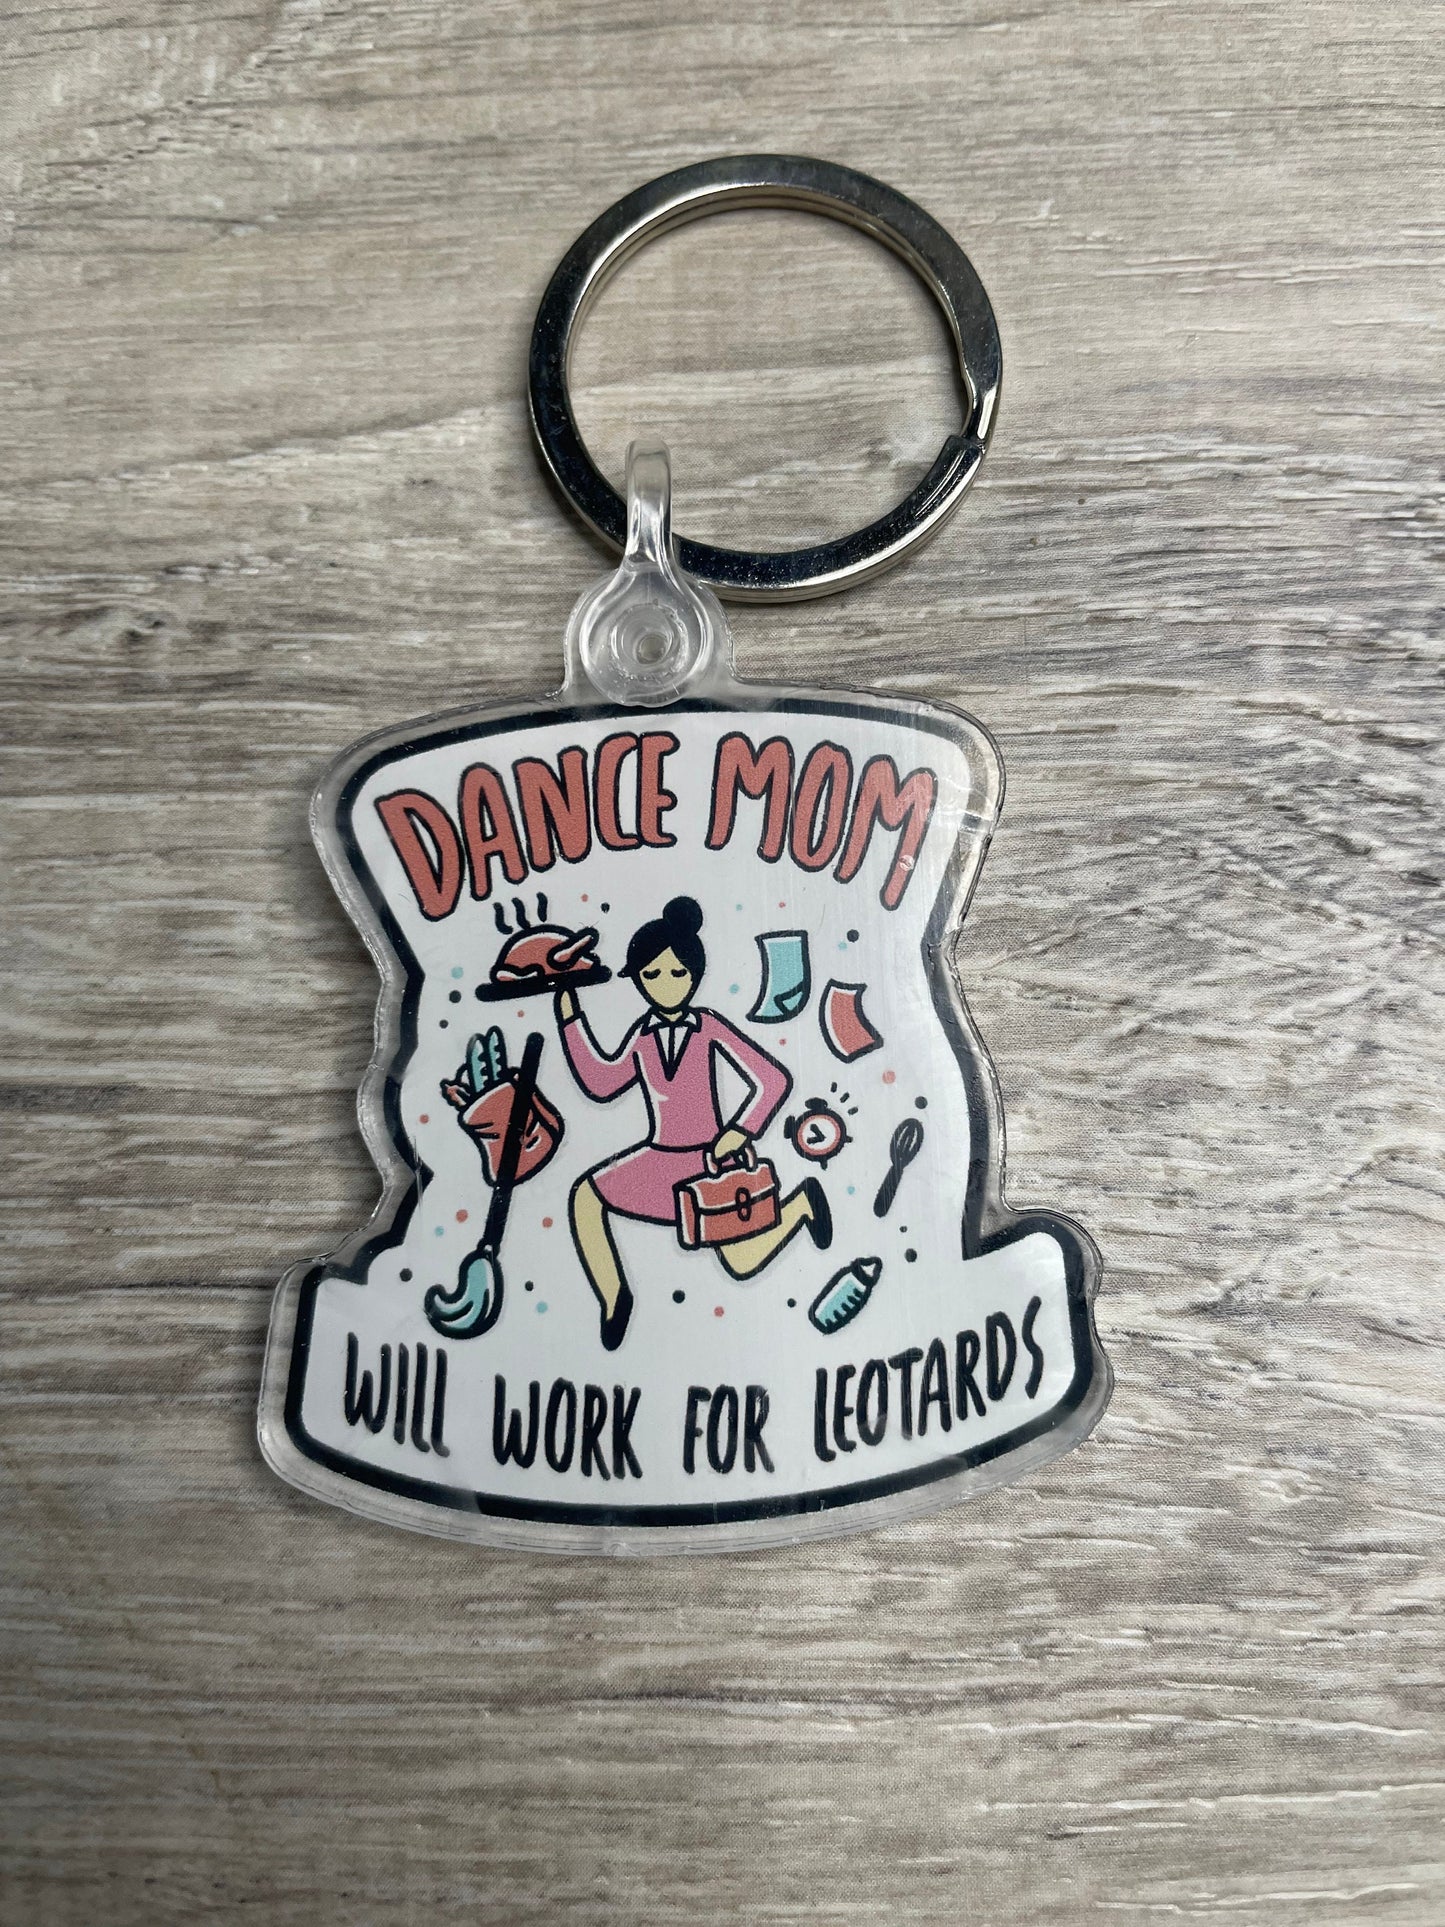 Dance Mom: Will Work for Leotards Key Chain, Dance Gift, Mothers Day